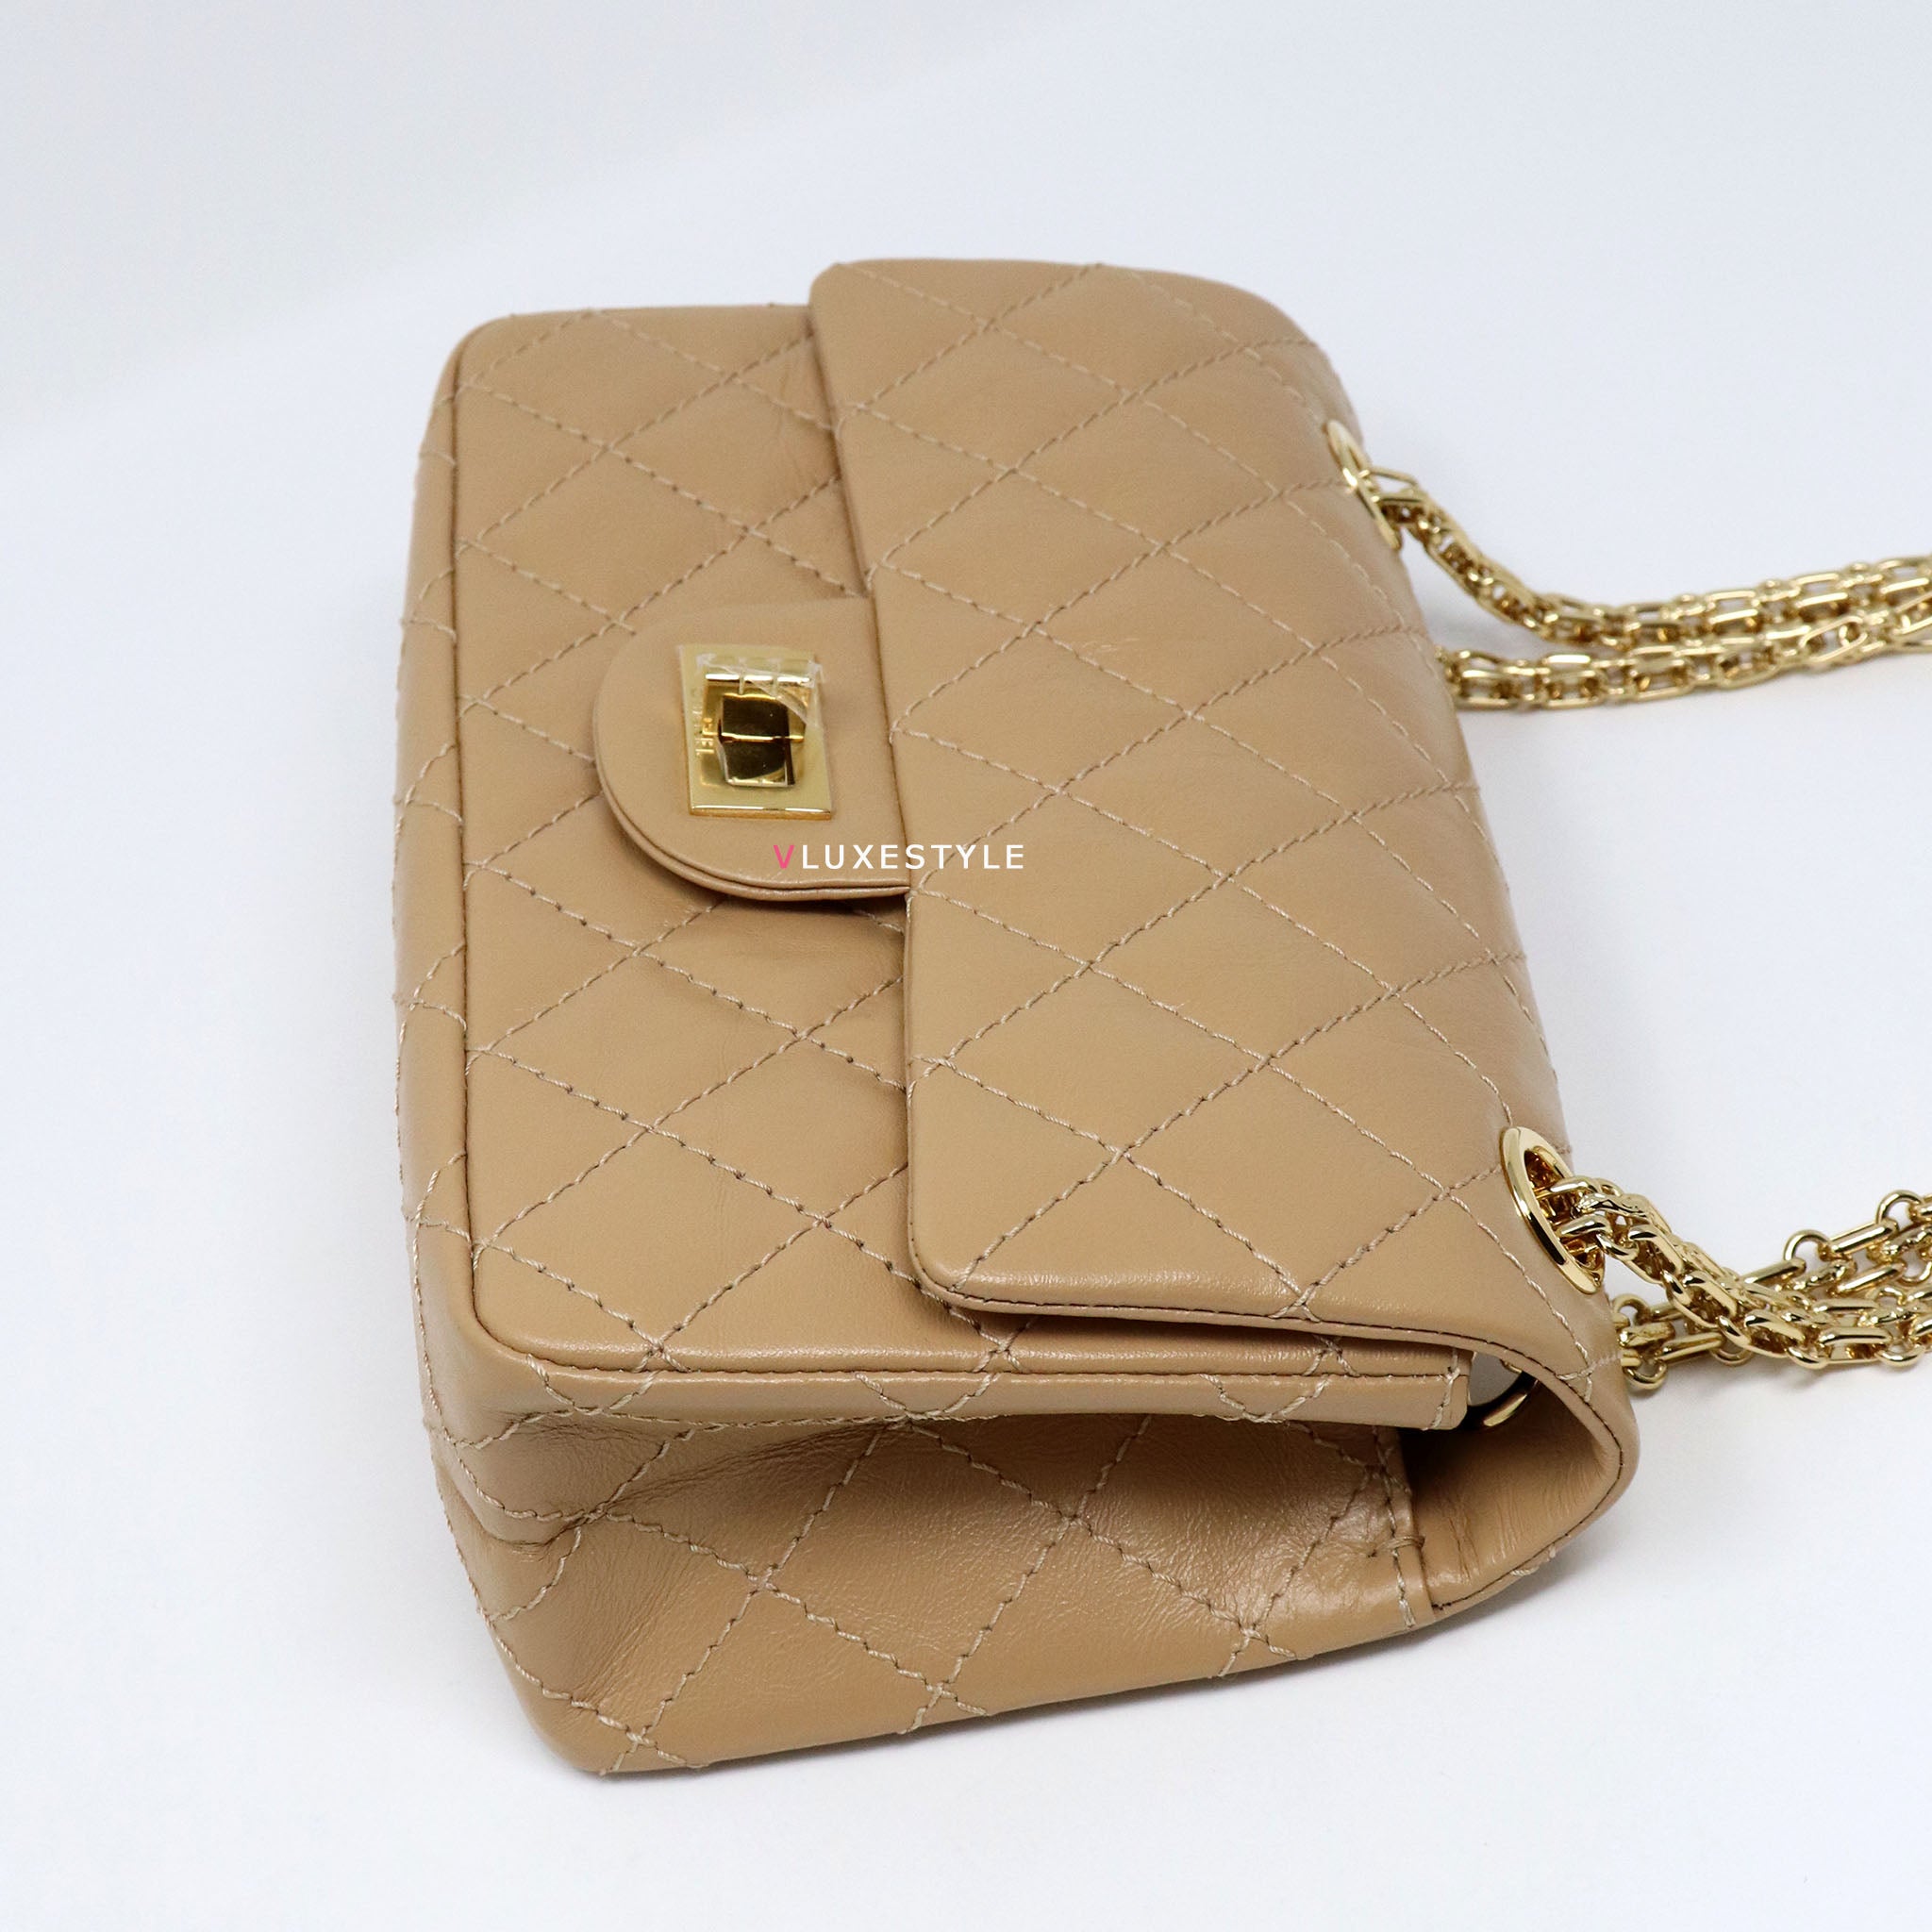 CHANEL- Handbag mini Timeless 18 cm in gold quilted la…